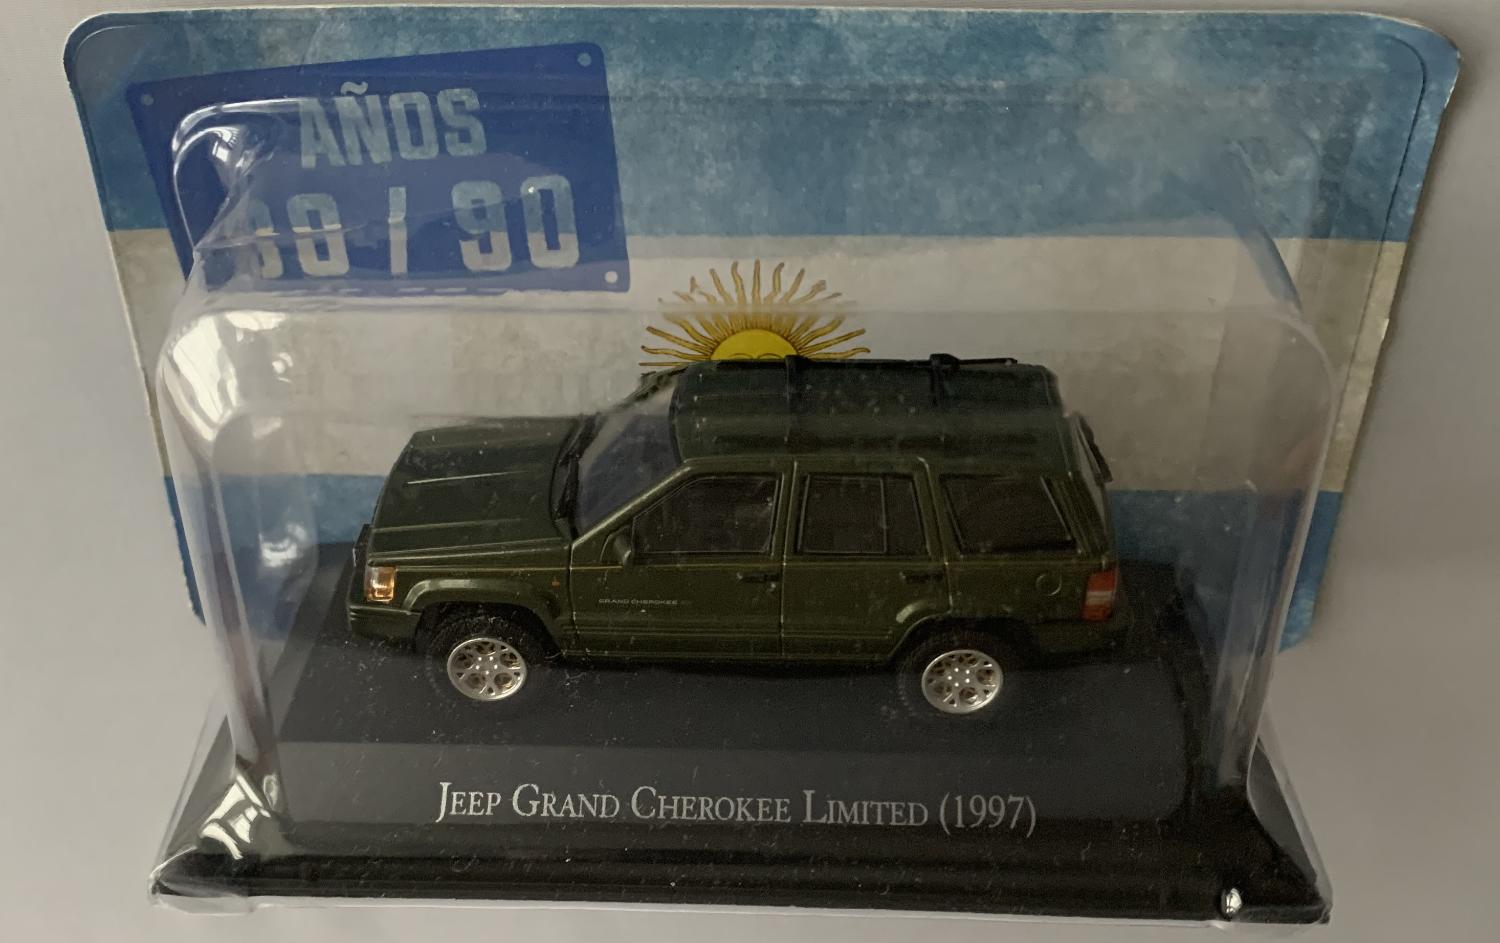 The model shown here is a good example of a Jeep Grand Cherokee Limited from 1997 finished in green with roof rack and working wheels